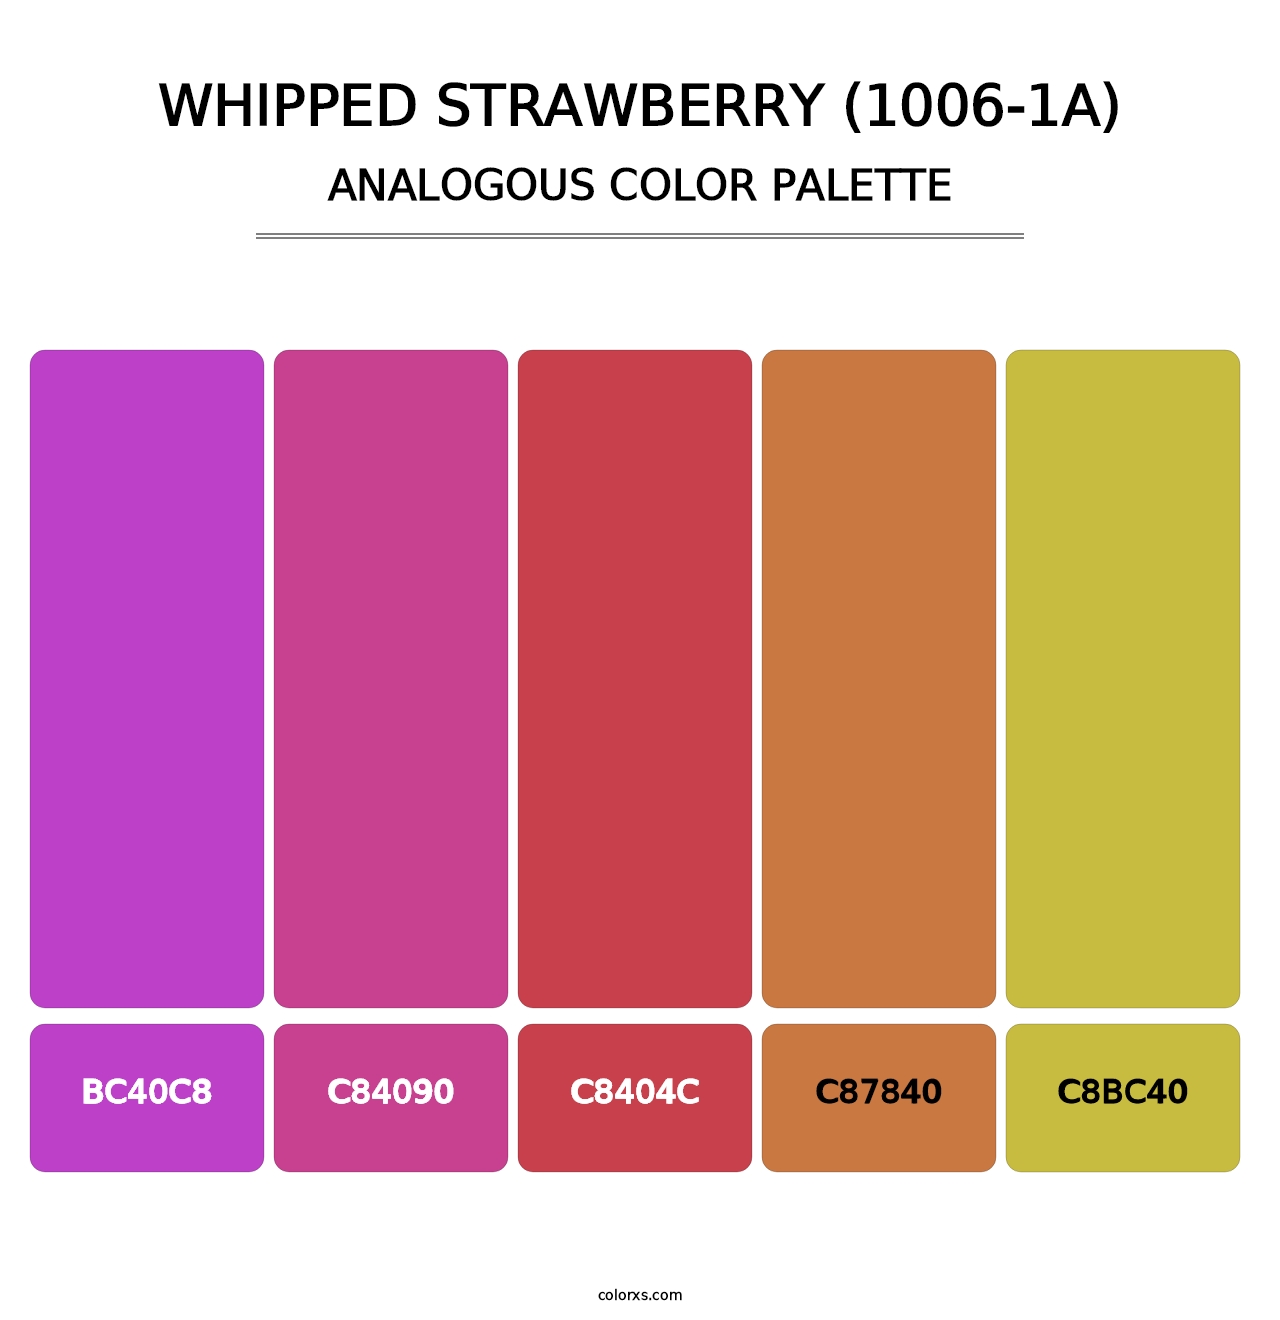 Whipped Strawberry (1006-1A) - Analogous Color Palette